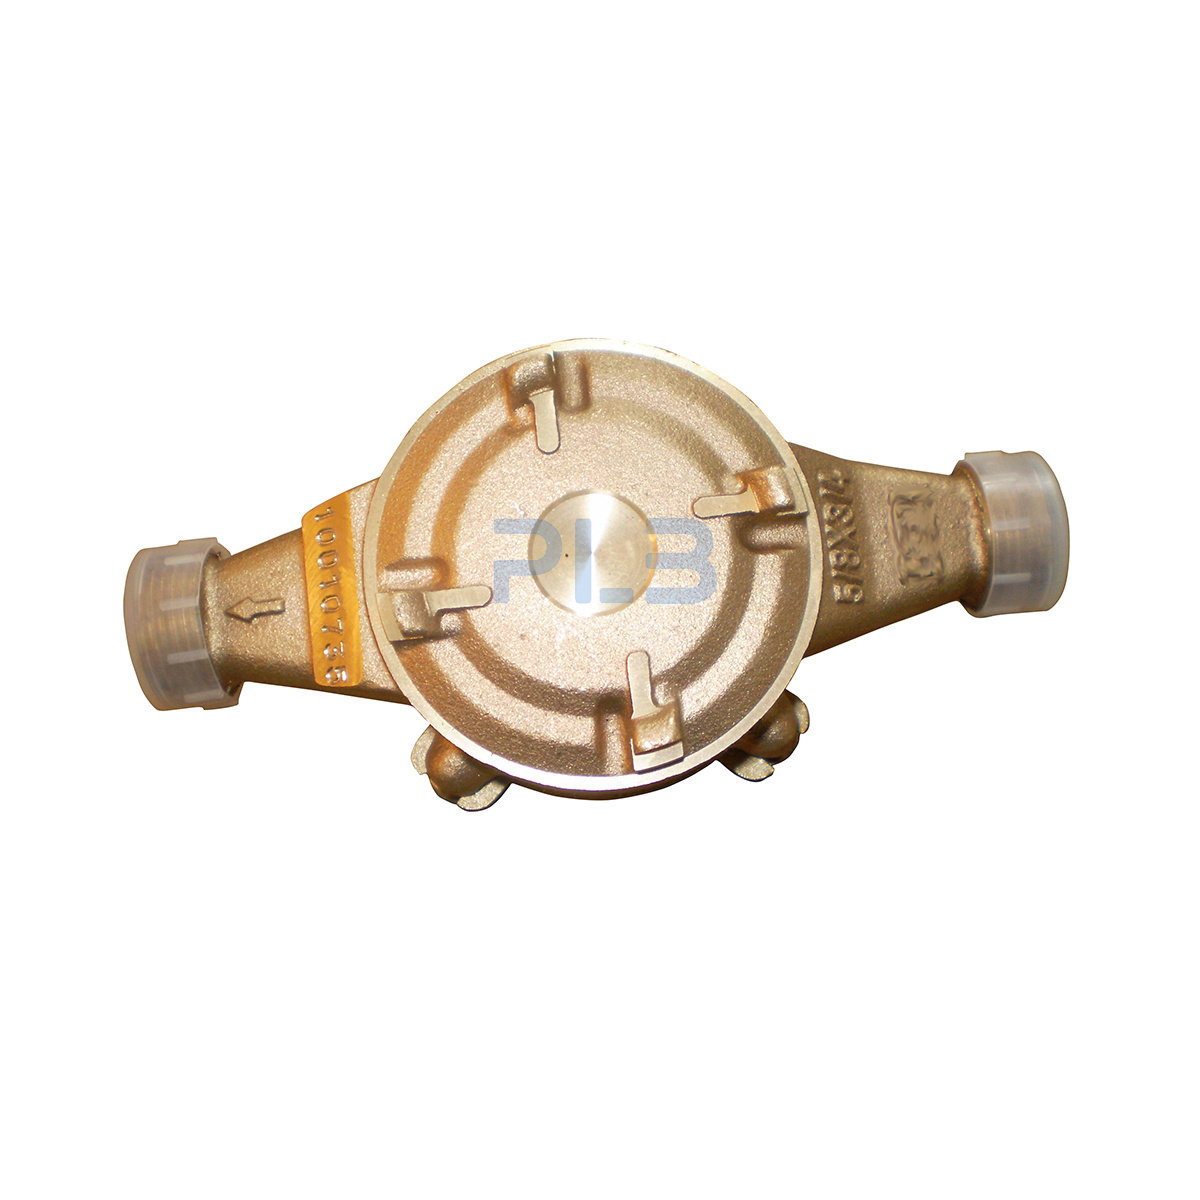 Lead Free Awwa Water Meter with Brass or Bronze Body